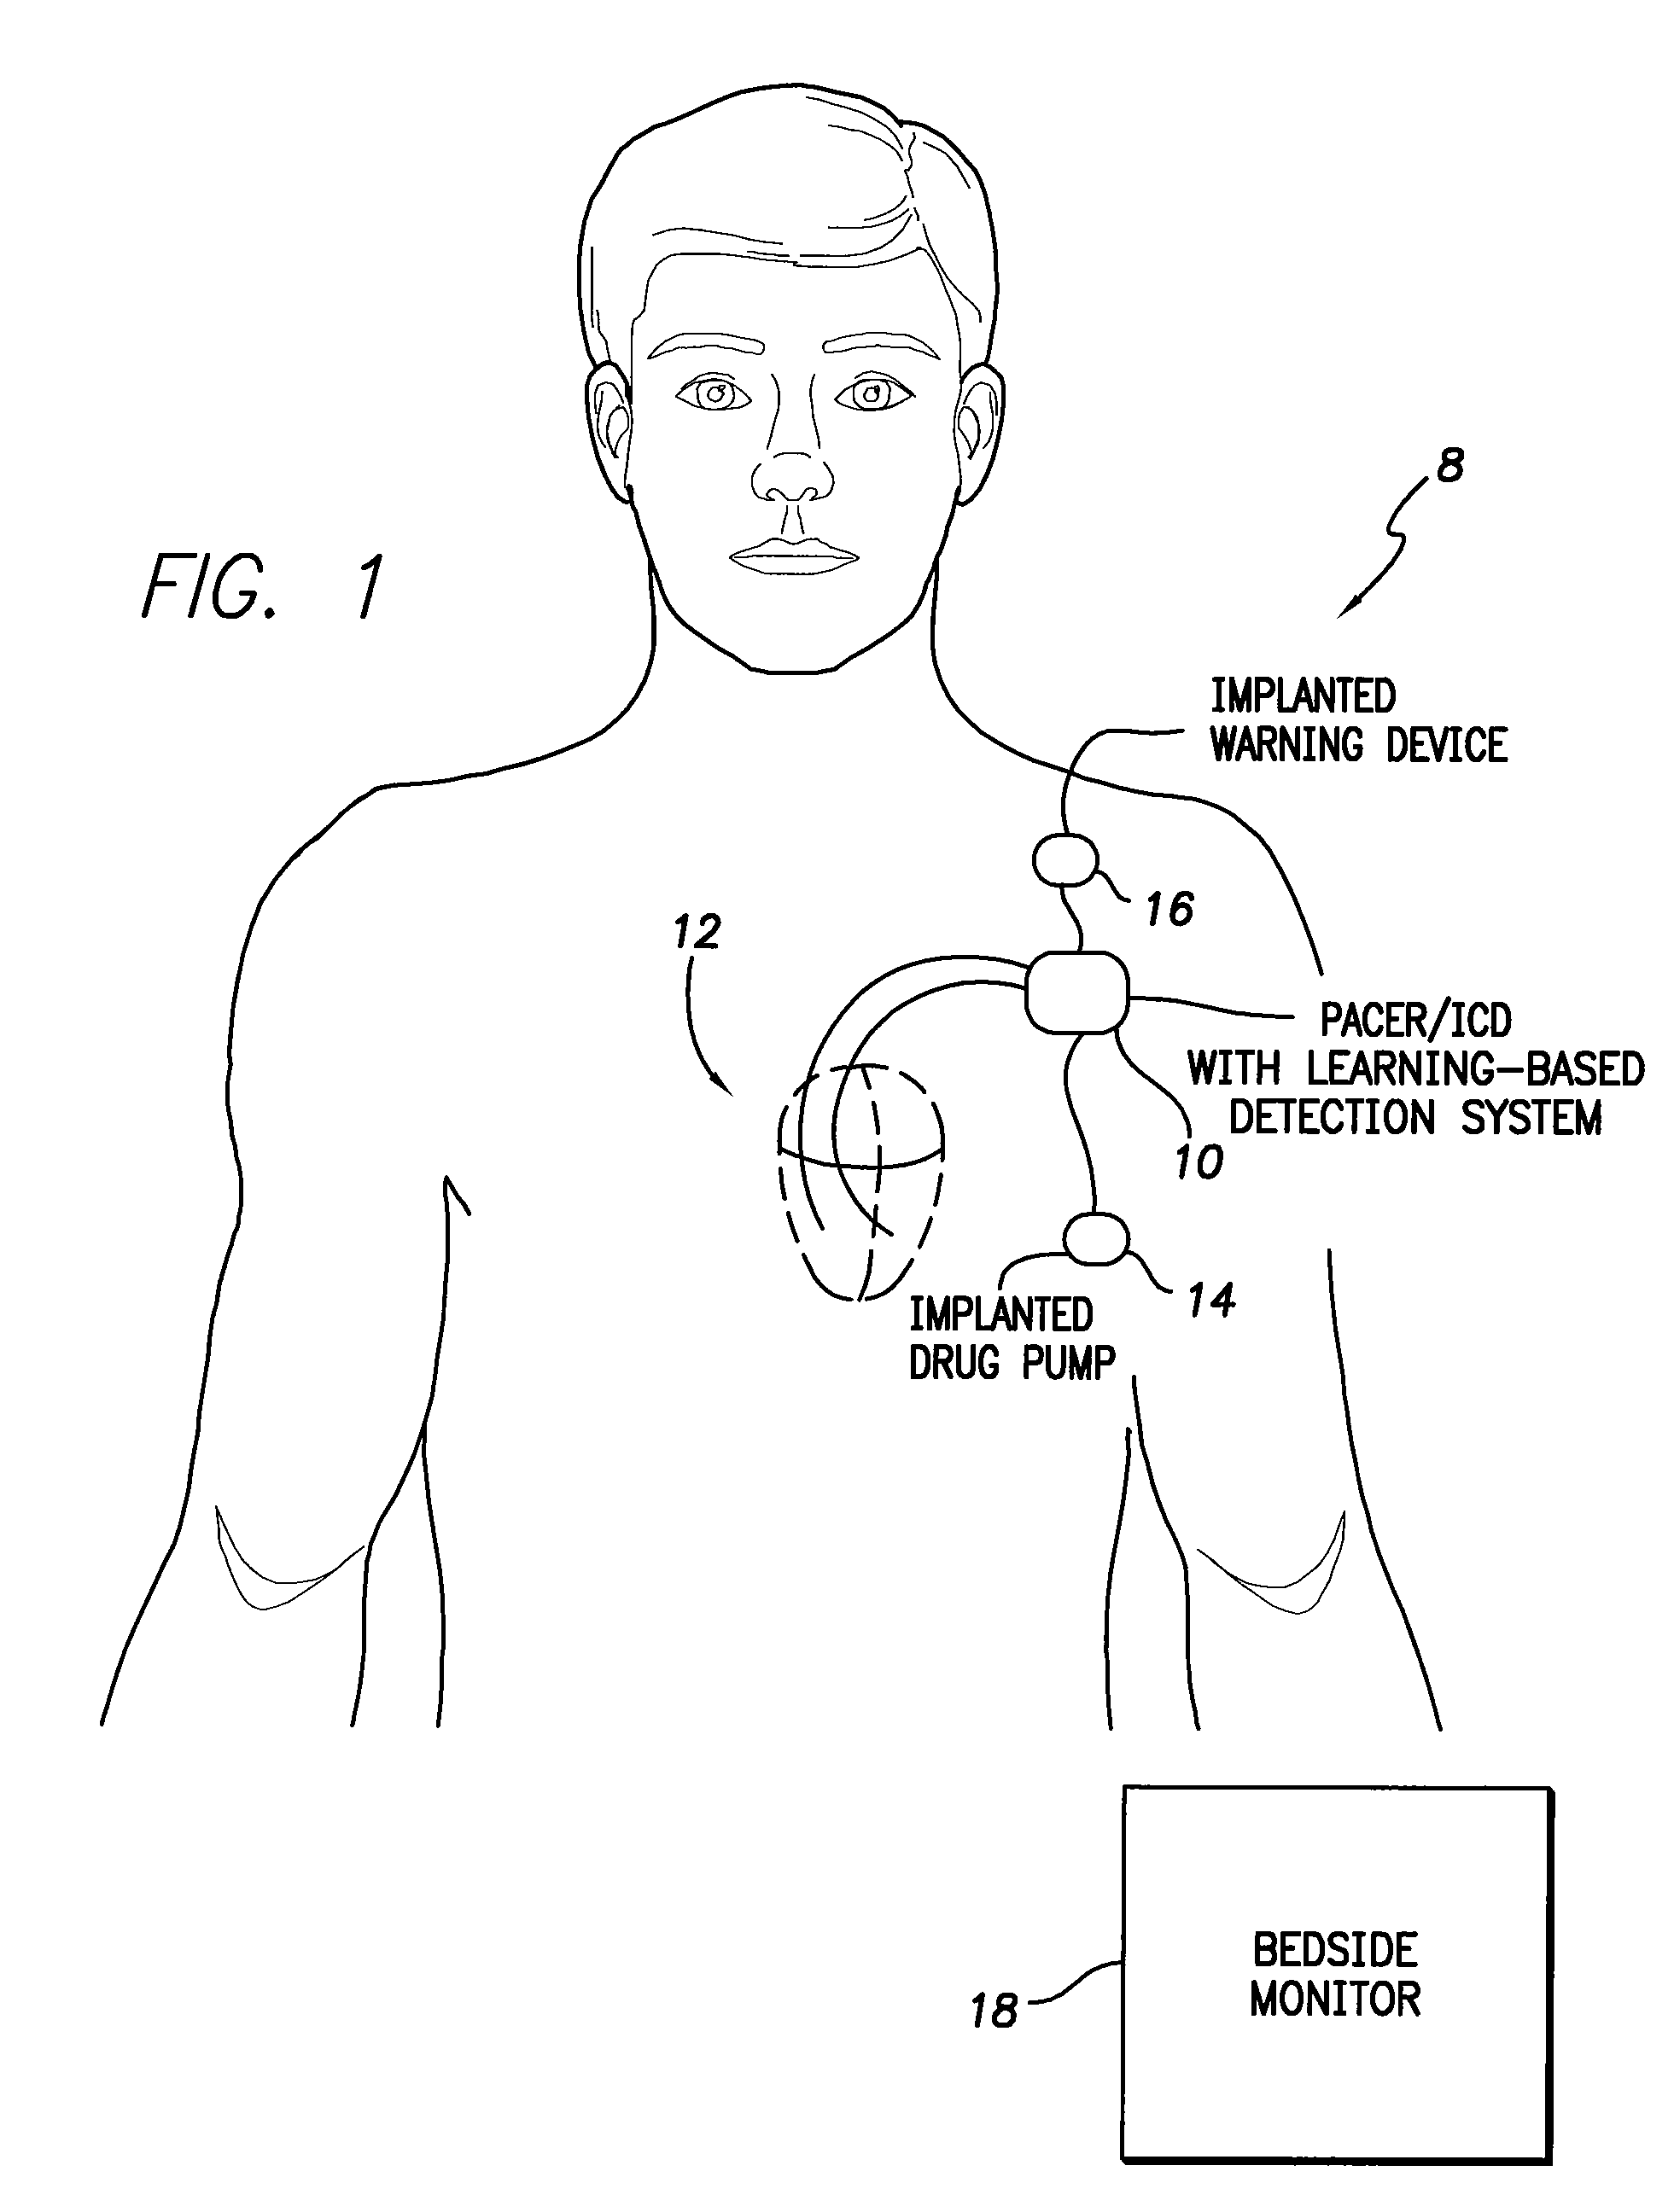 System and method for adaptively adjusting cardiac ischemia detection thresholds and other detection thresholds used by an implantable medical device